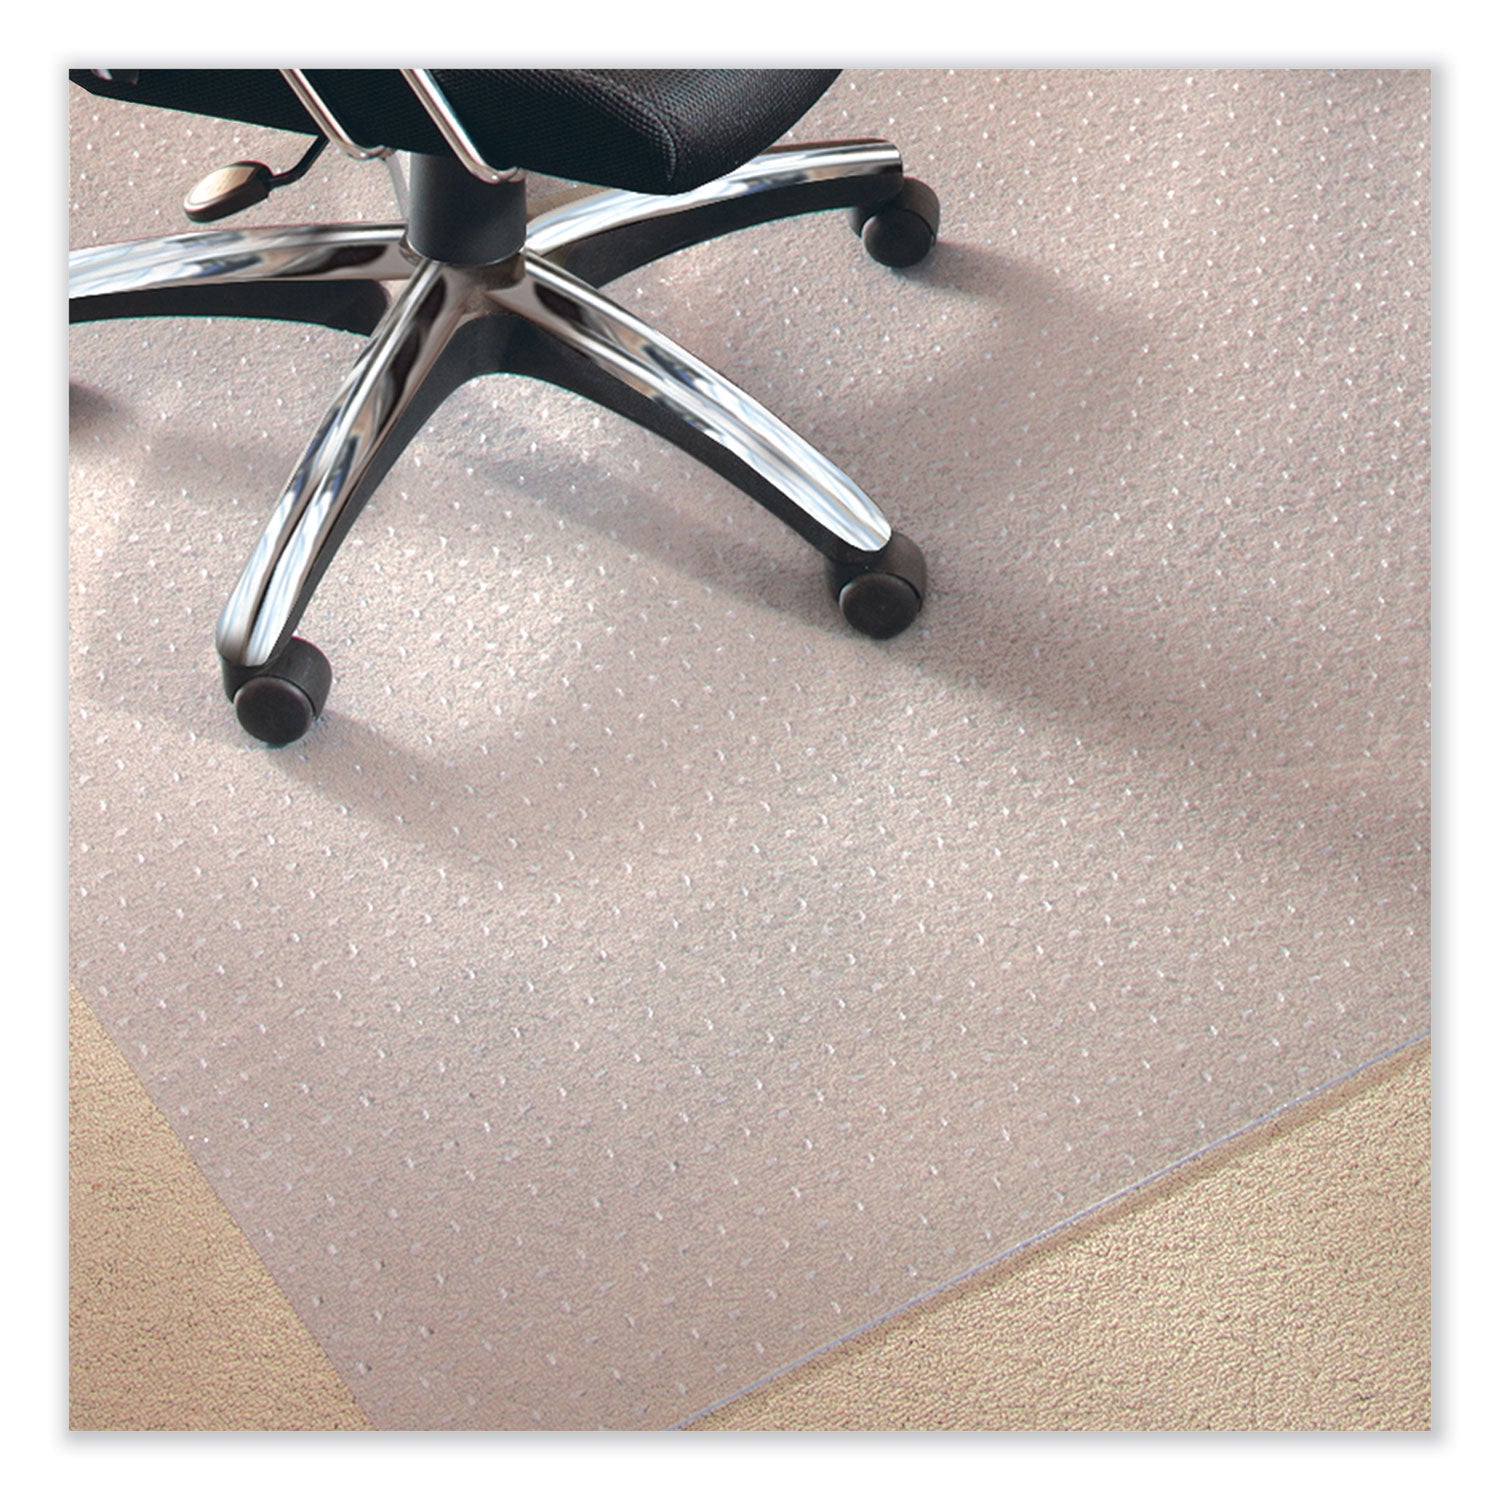 everlife-chair-mat-for-medium-pile-carpet-60-x-72-clear-ships-in-4-6-business-days_esr122781 - 6